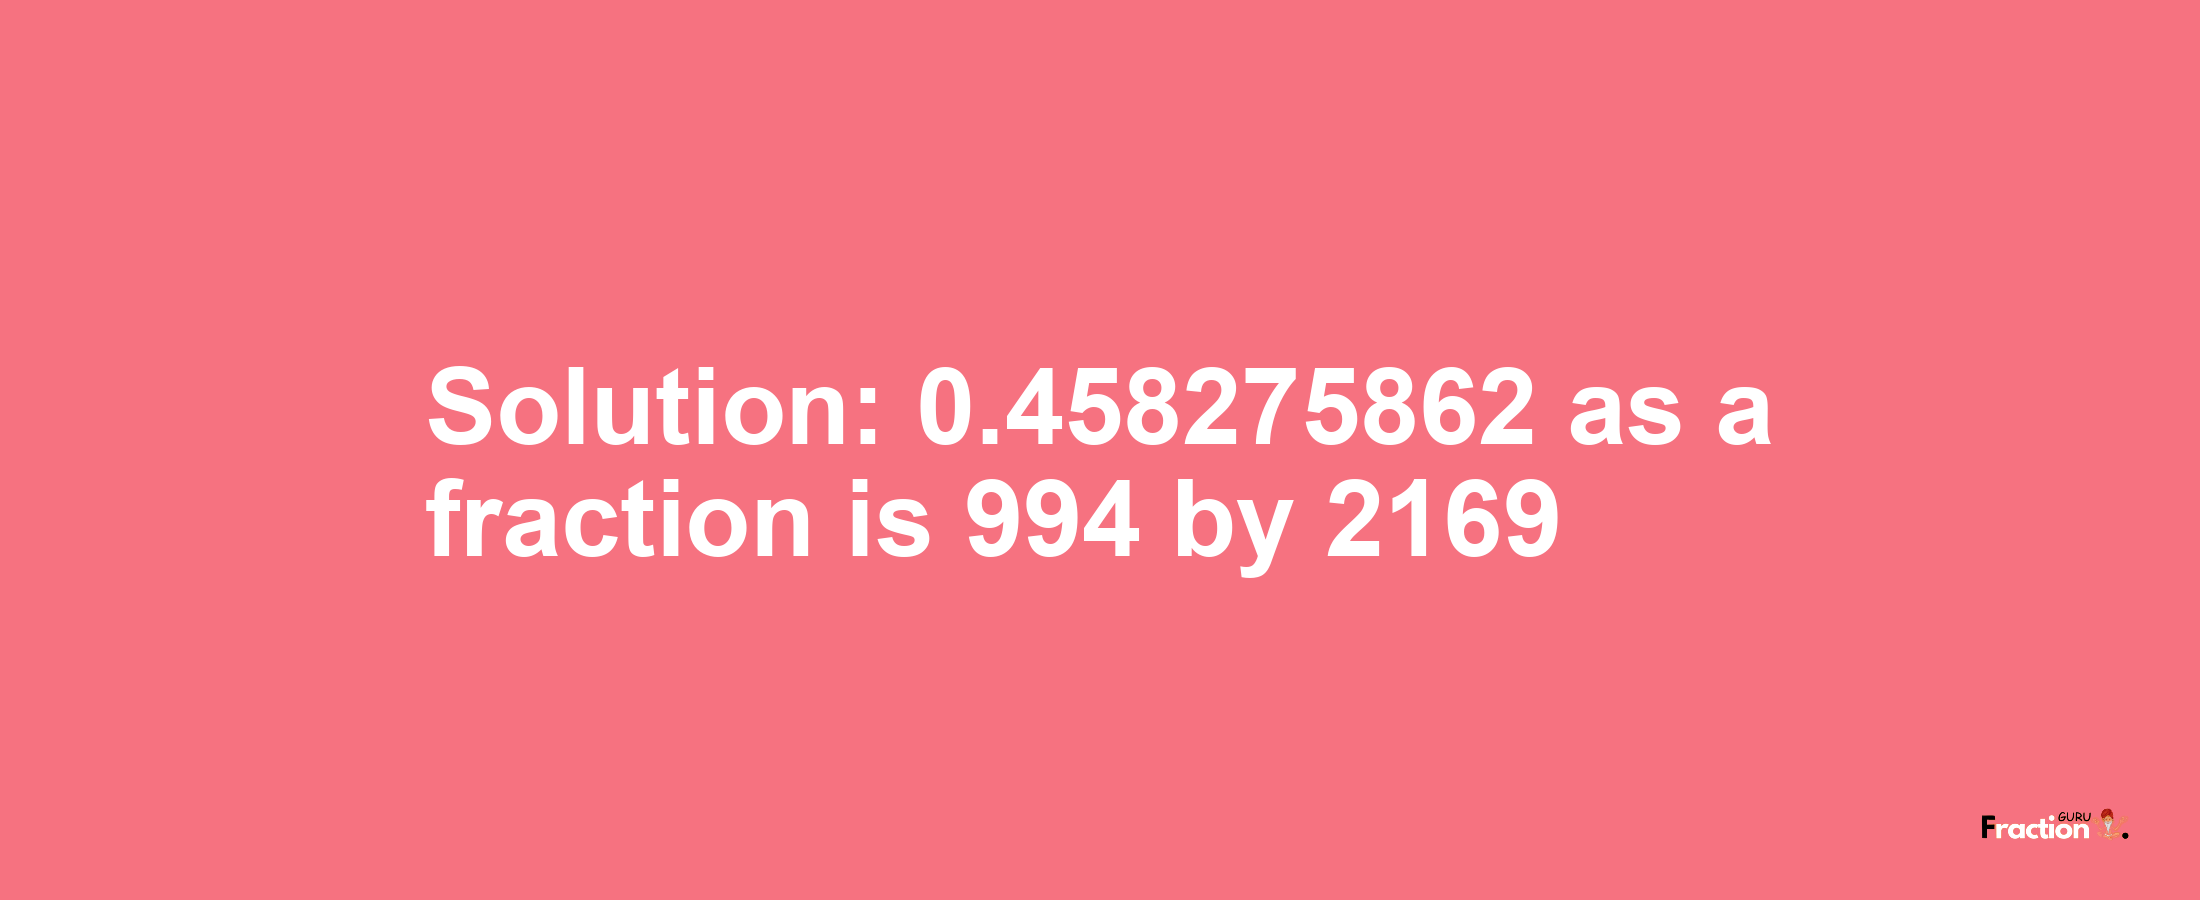 Solution:0.458275862 as a fraction is 994/2169